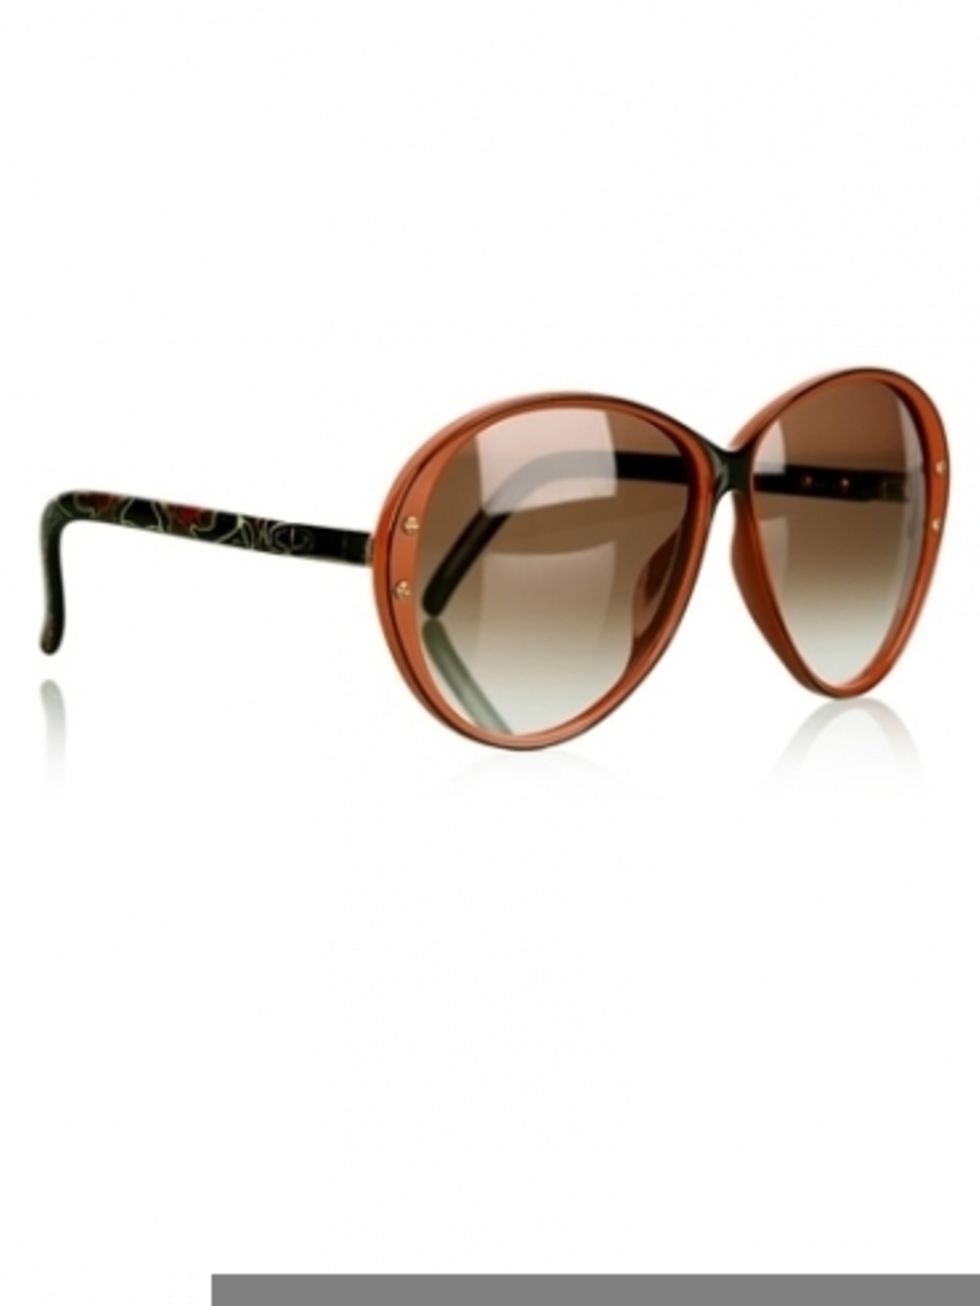 Eyewear, Glasses, Vision care, Product, Brown, Glass, Orange, Line, Amber, Tints and shades, 